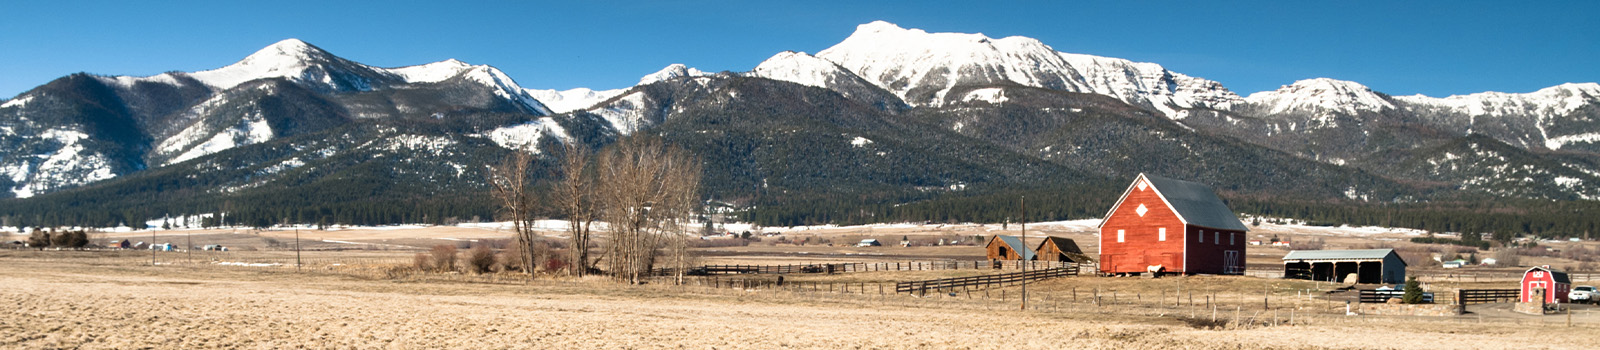 Snowy mountains behind red barn and farm